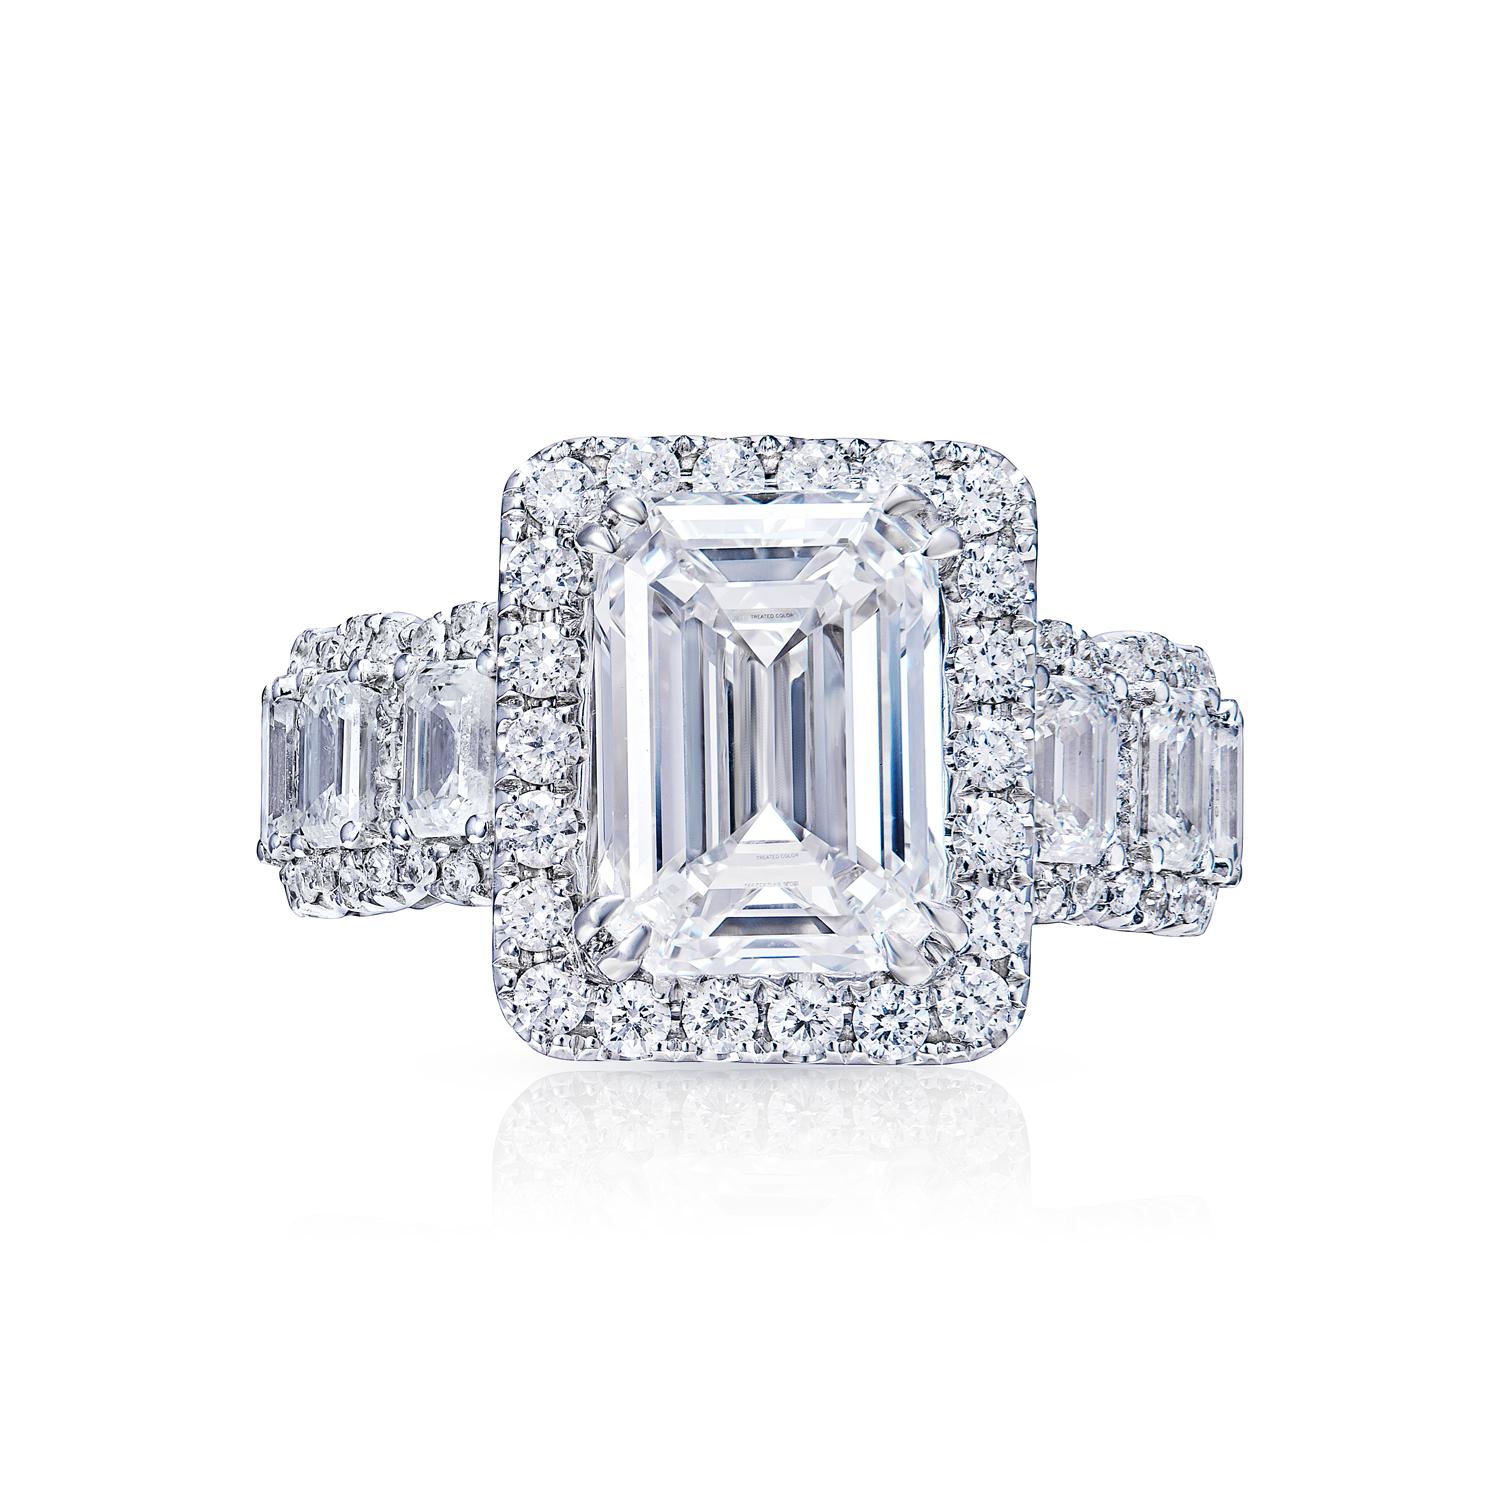 Earth Mined Diamond:

Carat Weight: 4.01 Carats
Color: E*
Clarity: IF
Style: Emerald Cut
*This Diamond has been treated by one or more processes to change its color

Ring:
Total Carats: 6.76 Carats
Diamond: 2.75 Carats
Shape: Combine Mix Shape